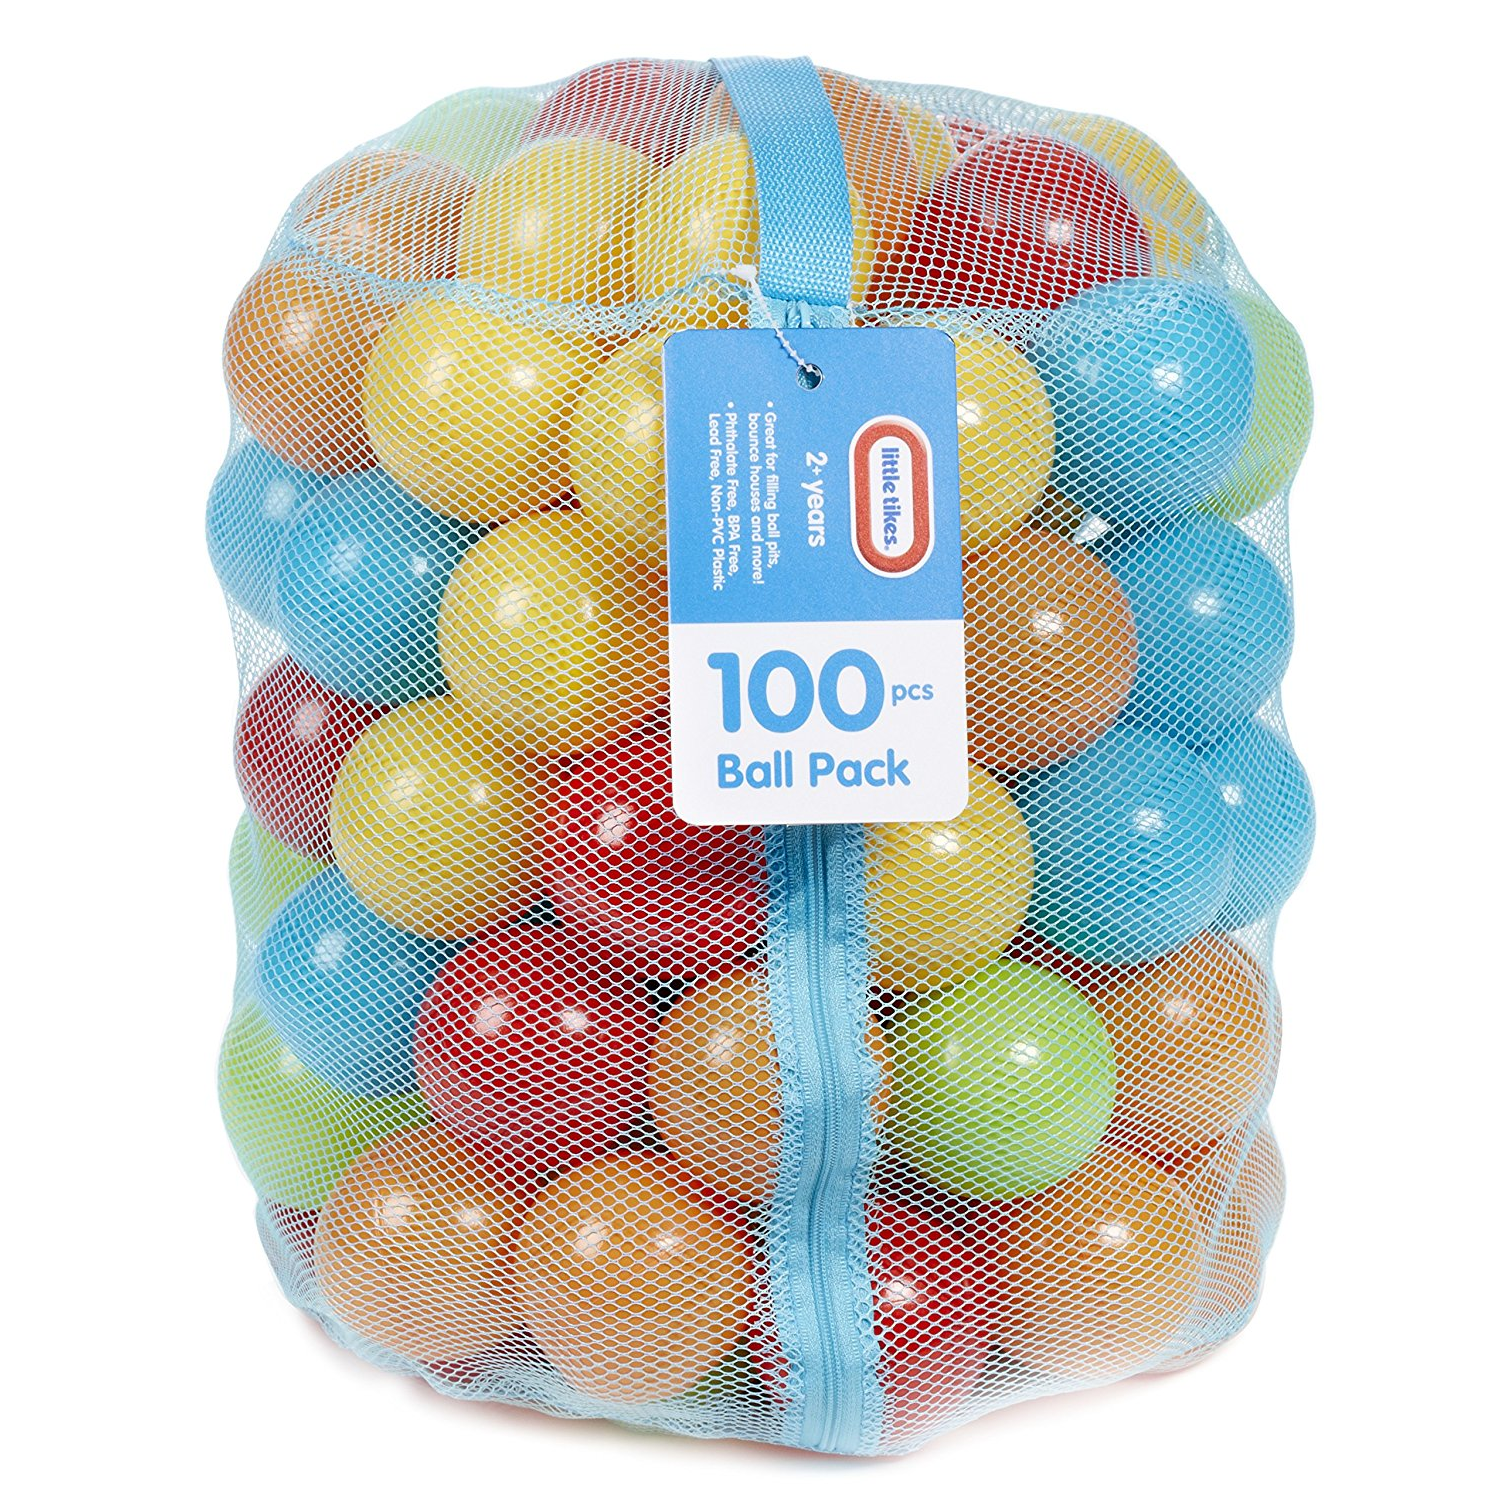 Little Tikes Ball Pit Balls (100 Piece) Only $9.99 on Amazon!